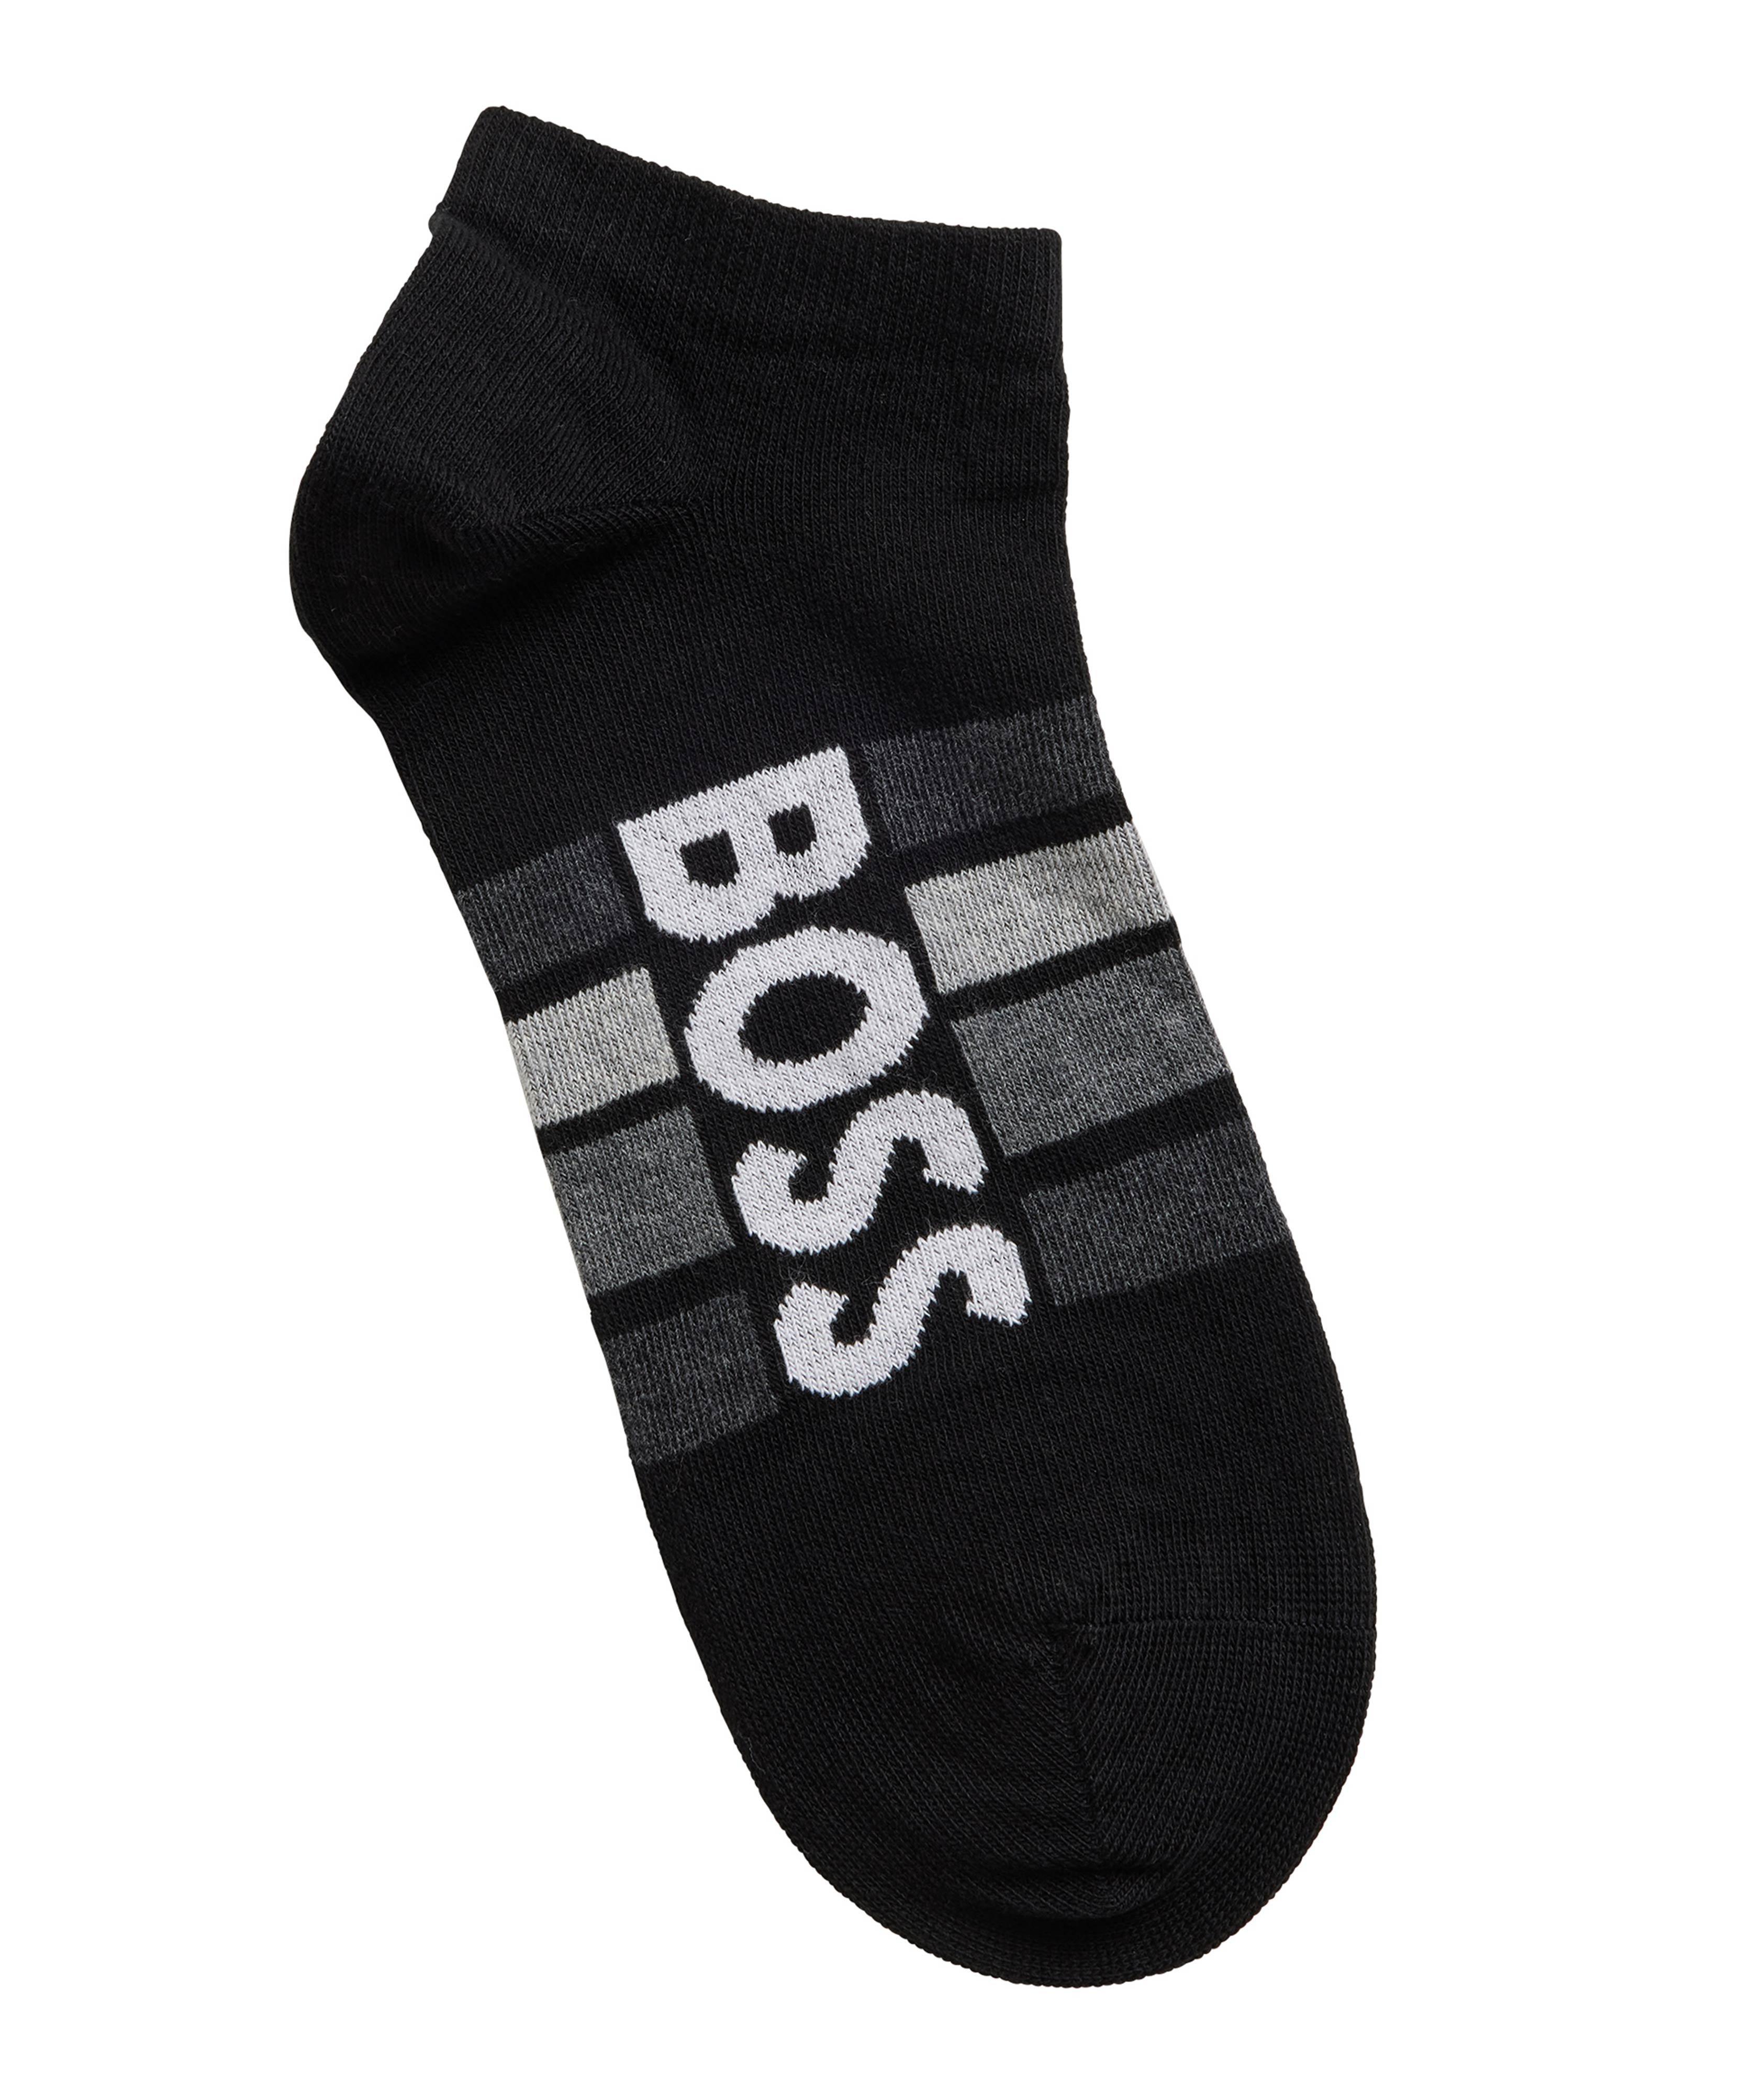 Two-Pack of Short Socks with Stripes and Logo  image 0